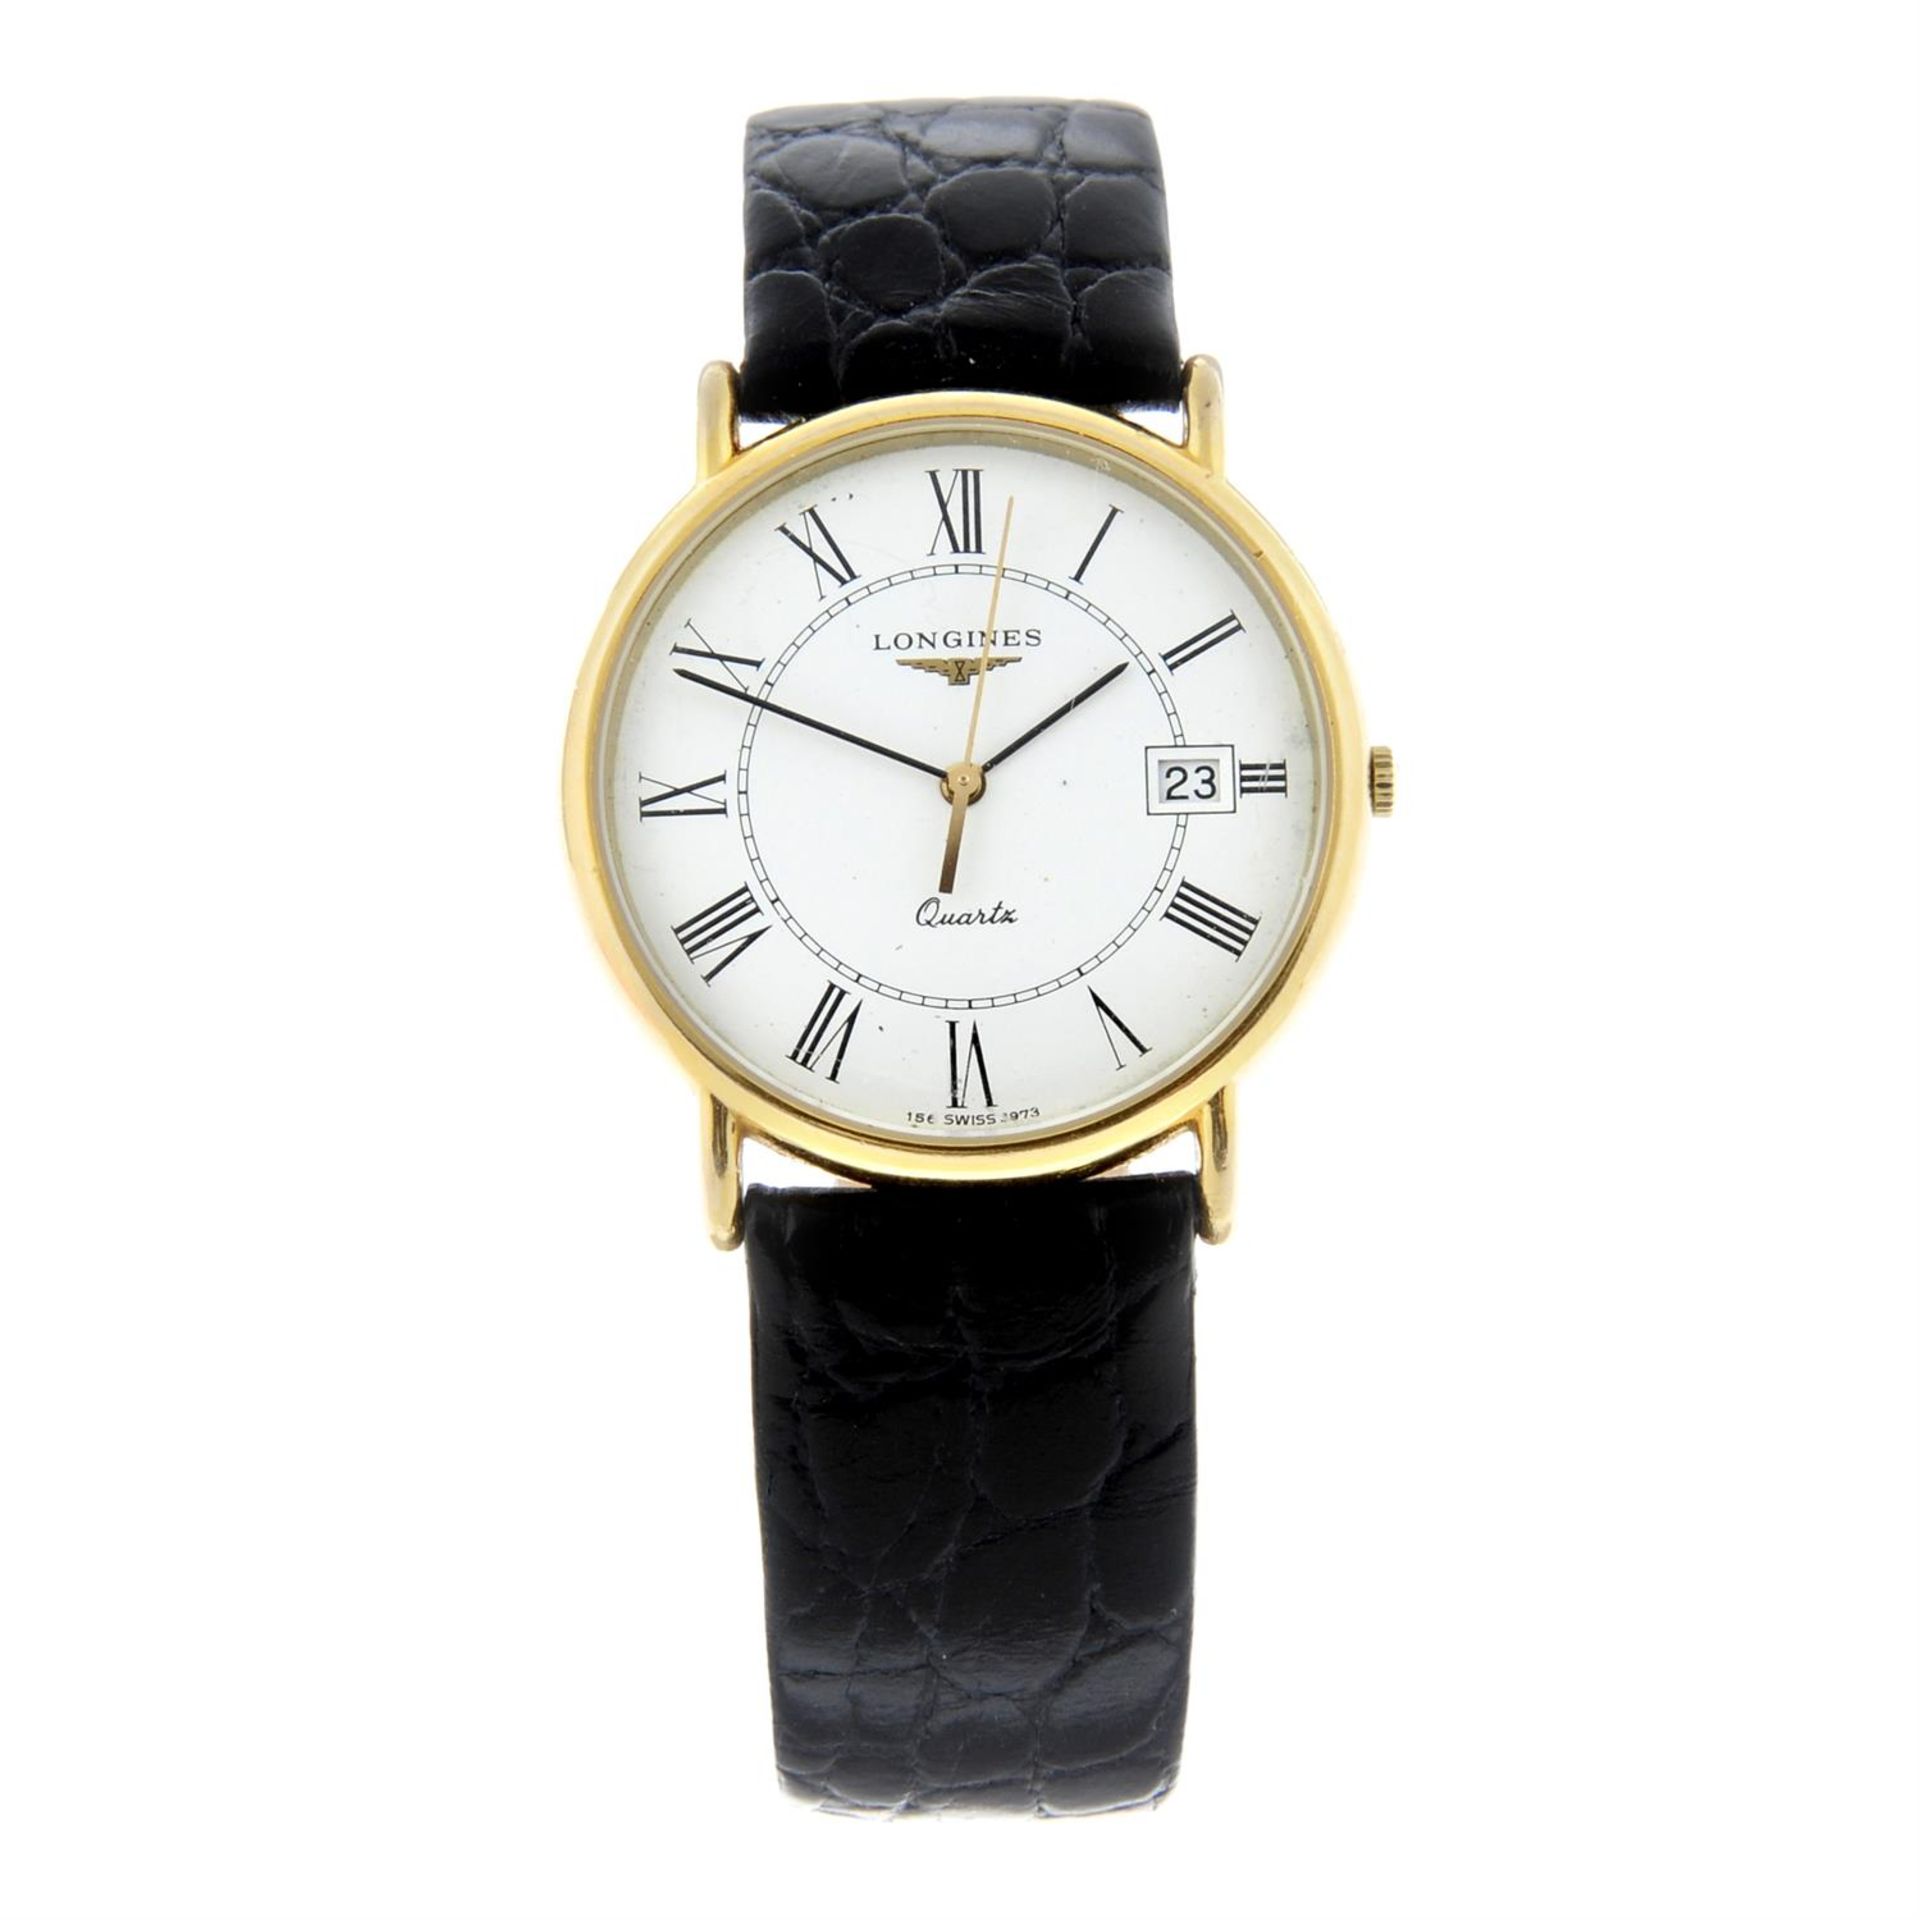 LONGINES - a 9ct yellow gold wrist watch (32.5mm) with a Pequignet bracelet watch.